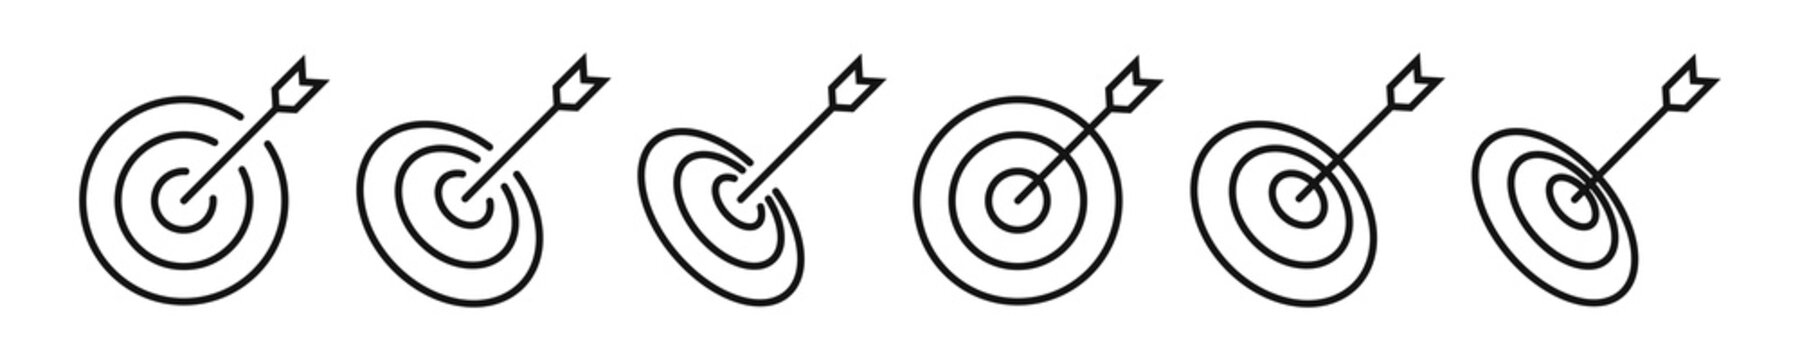 Archery target. Archery target icons in linear flat style. Sharpened archery target vector icon set. Target isolated icon. Achive goal concept. Vector